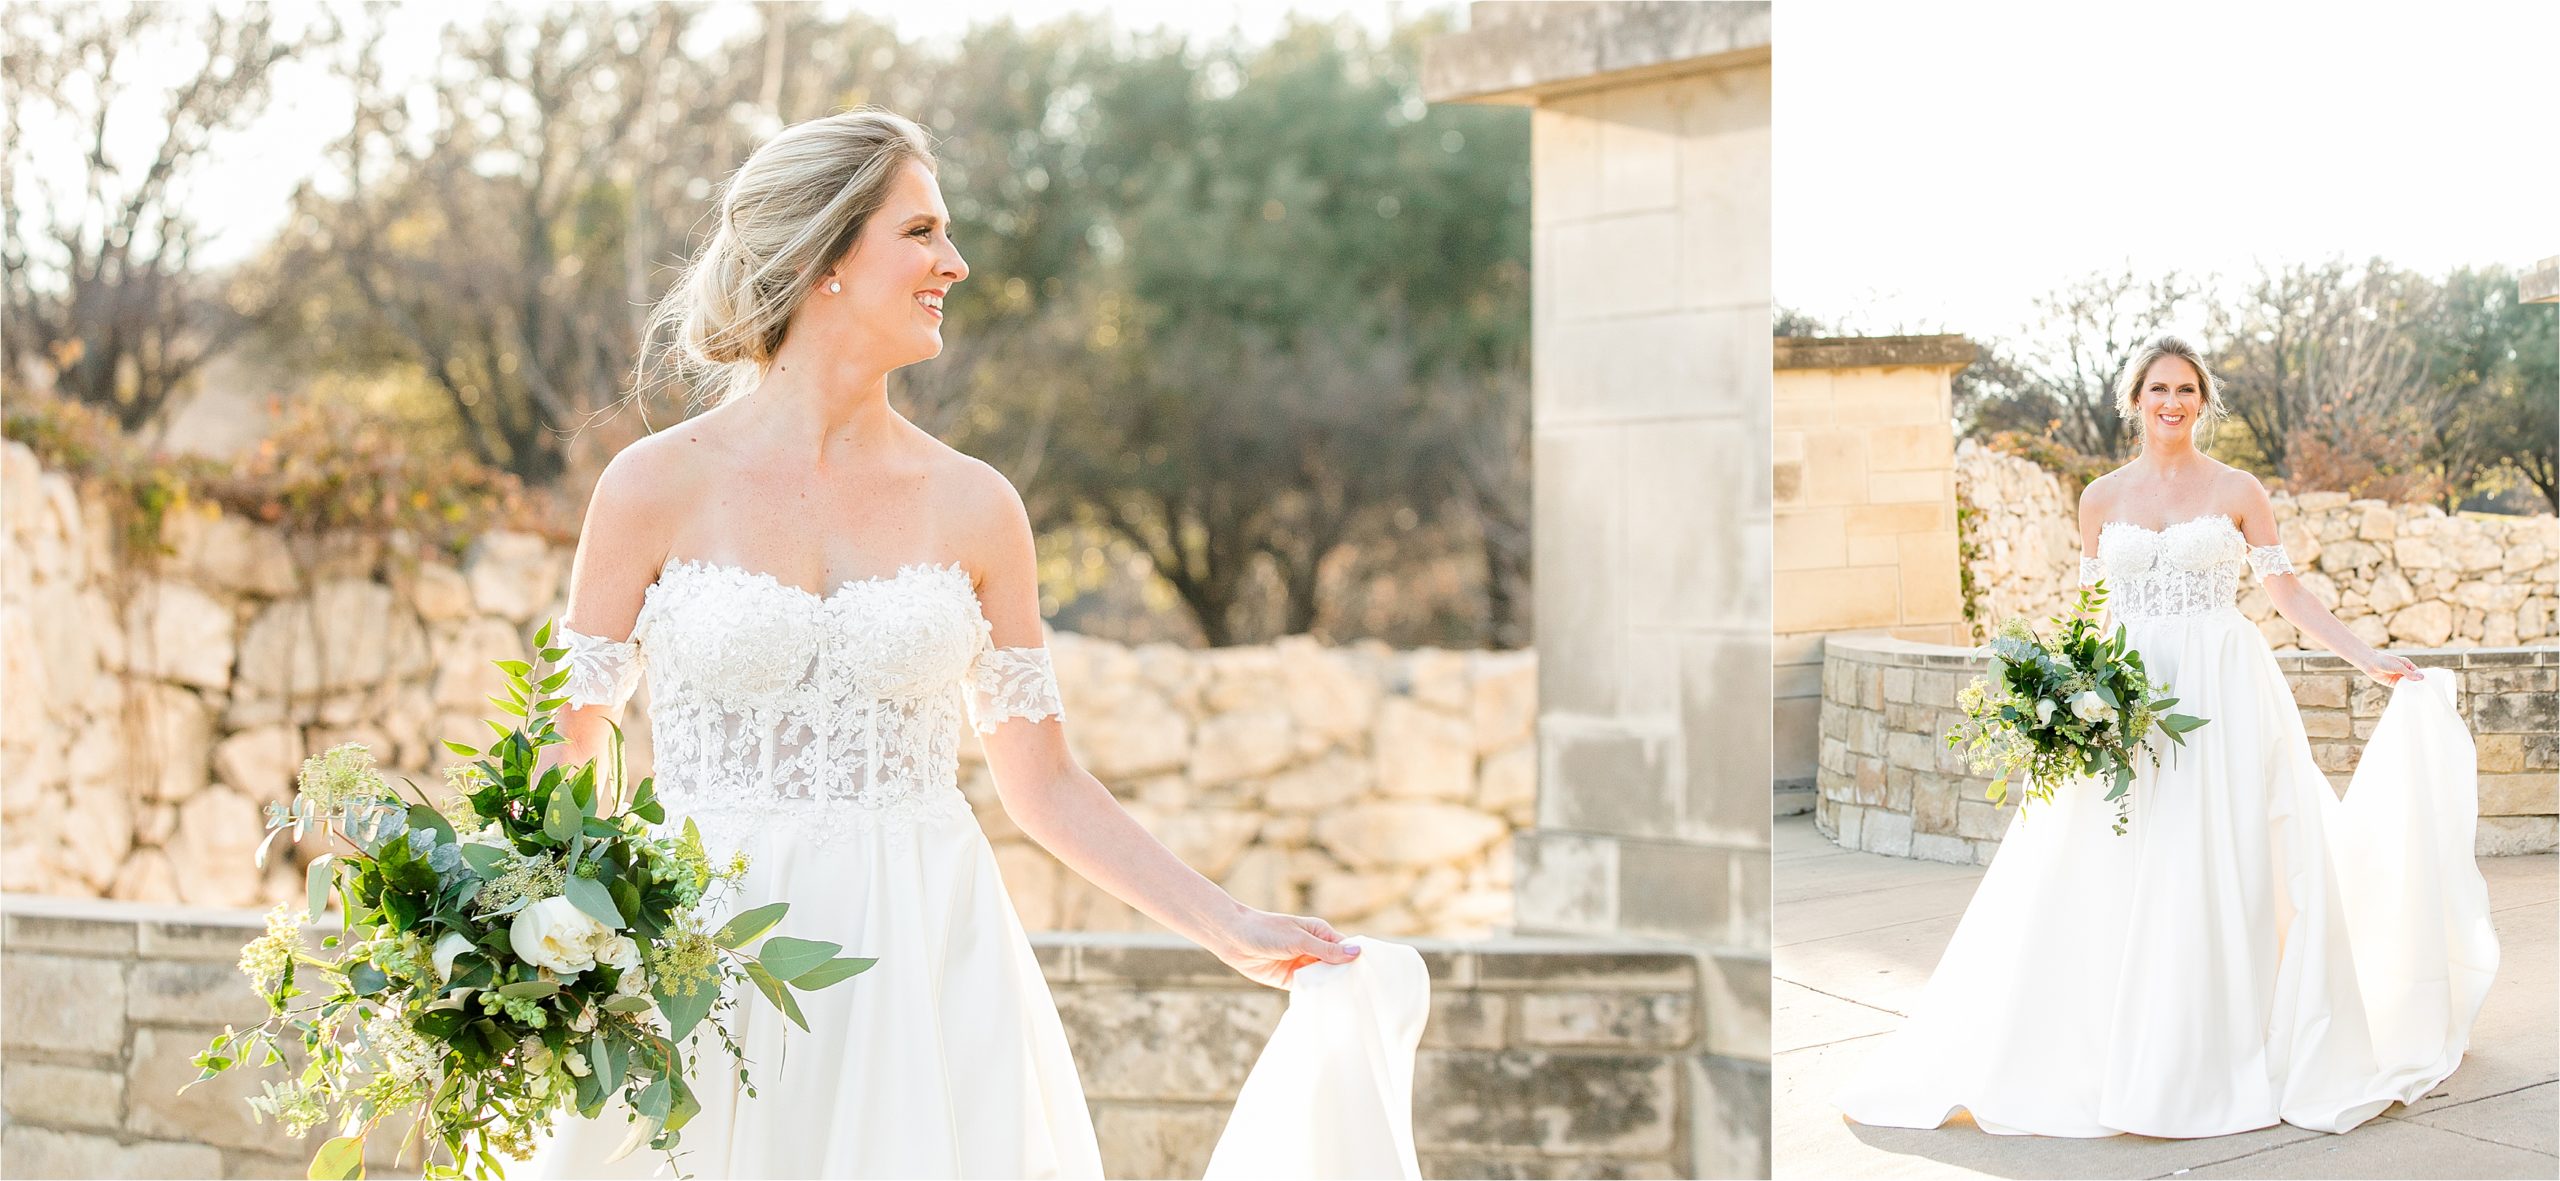 A bride in an off the shoulder wedding gown holds onto her dress and greenery filled bouquet during her winter bridal portraits at adriatica village with San Antonio Wedding Photographer Jillian Hogan 